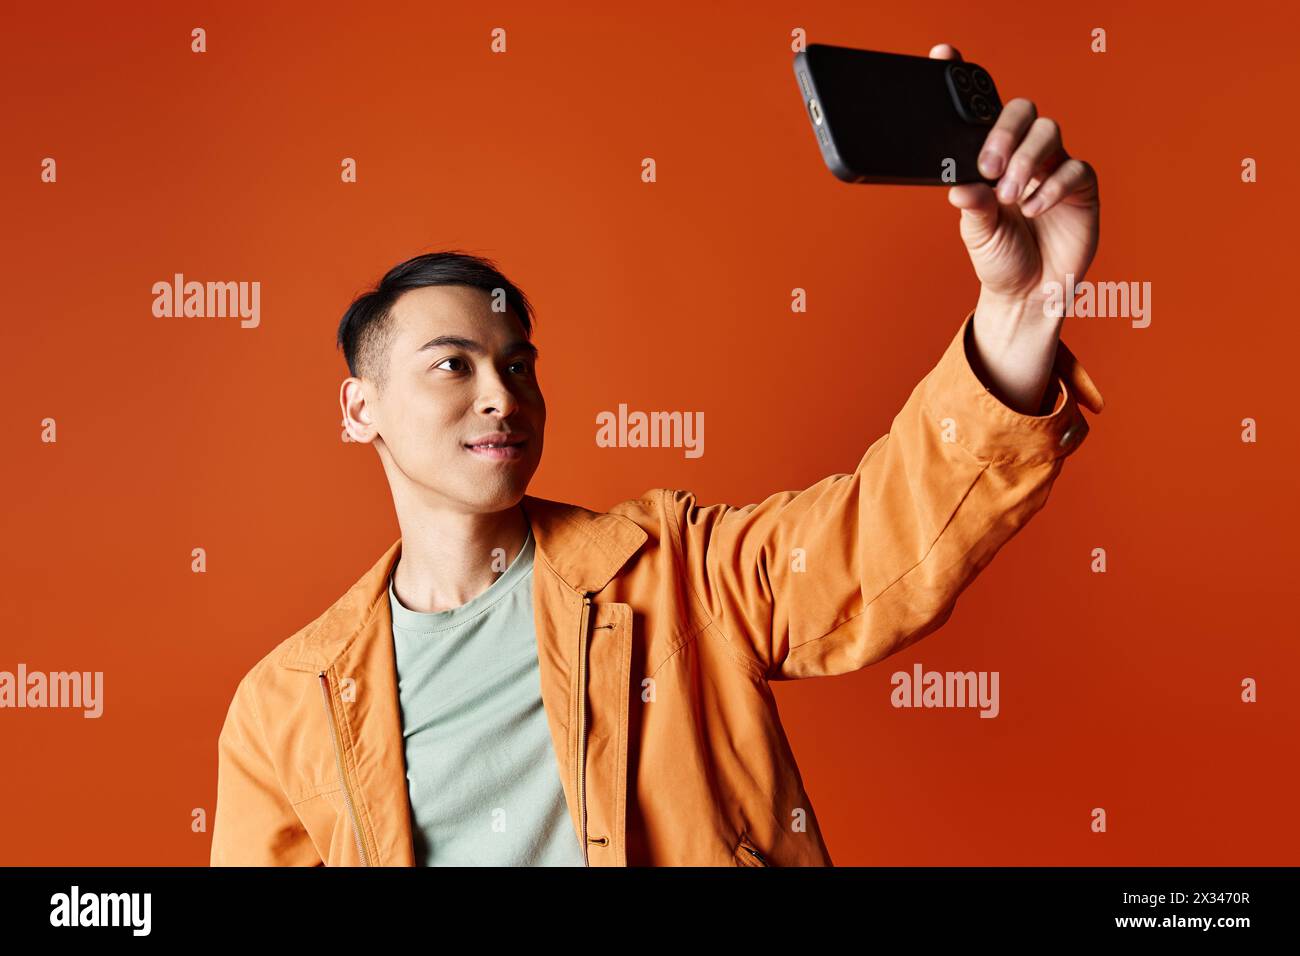 Handsome Asian man in stylish attire taking a picture with his cell phone against an orange studio background. Stock Photo